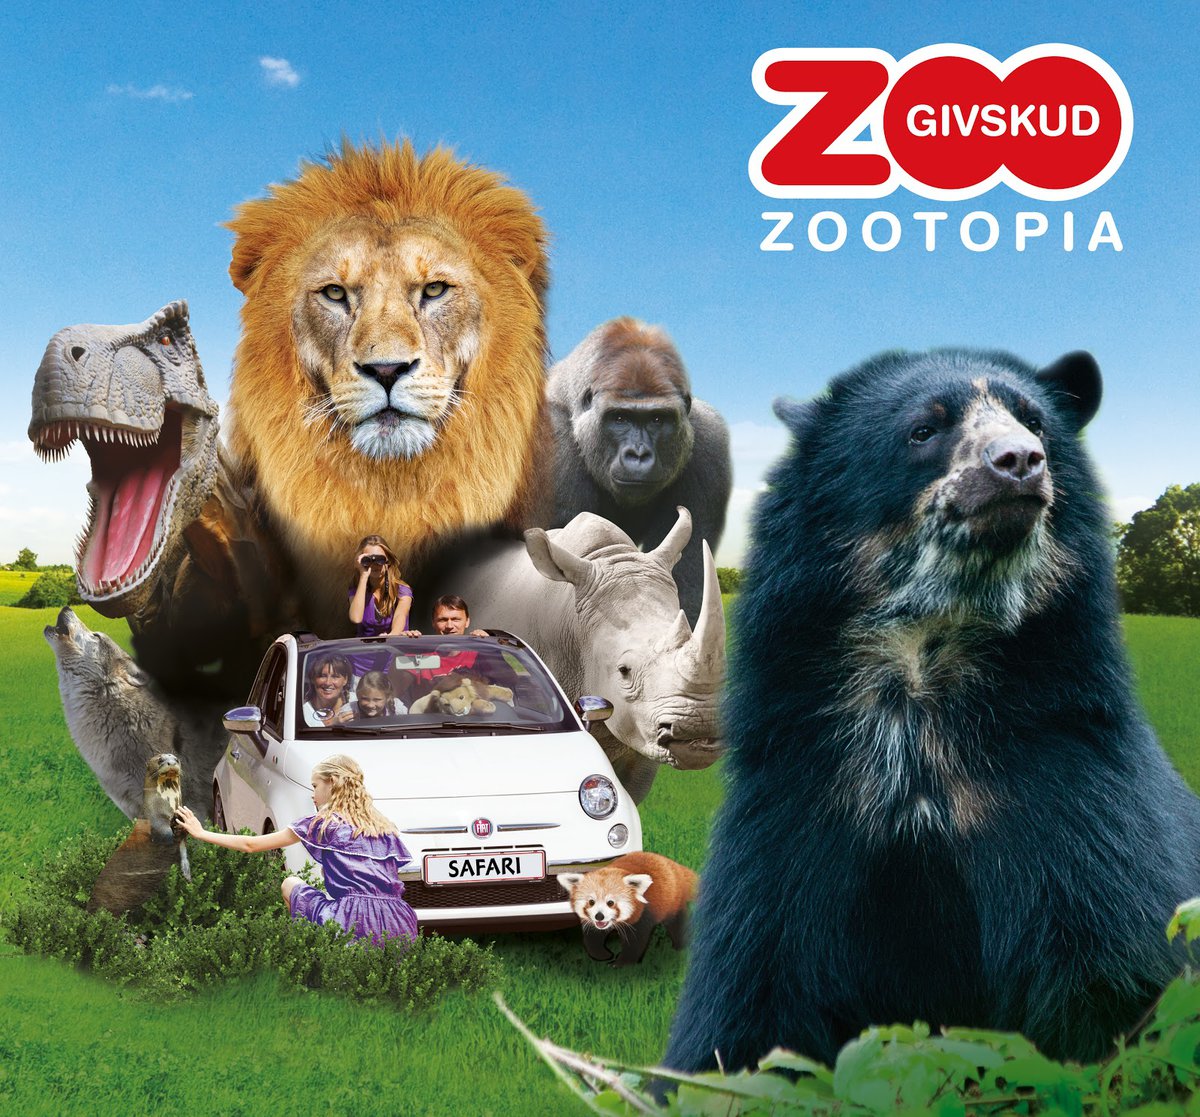 A picture of GIVSKUD ZOO ZOOTOPIA